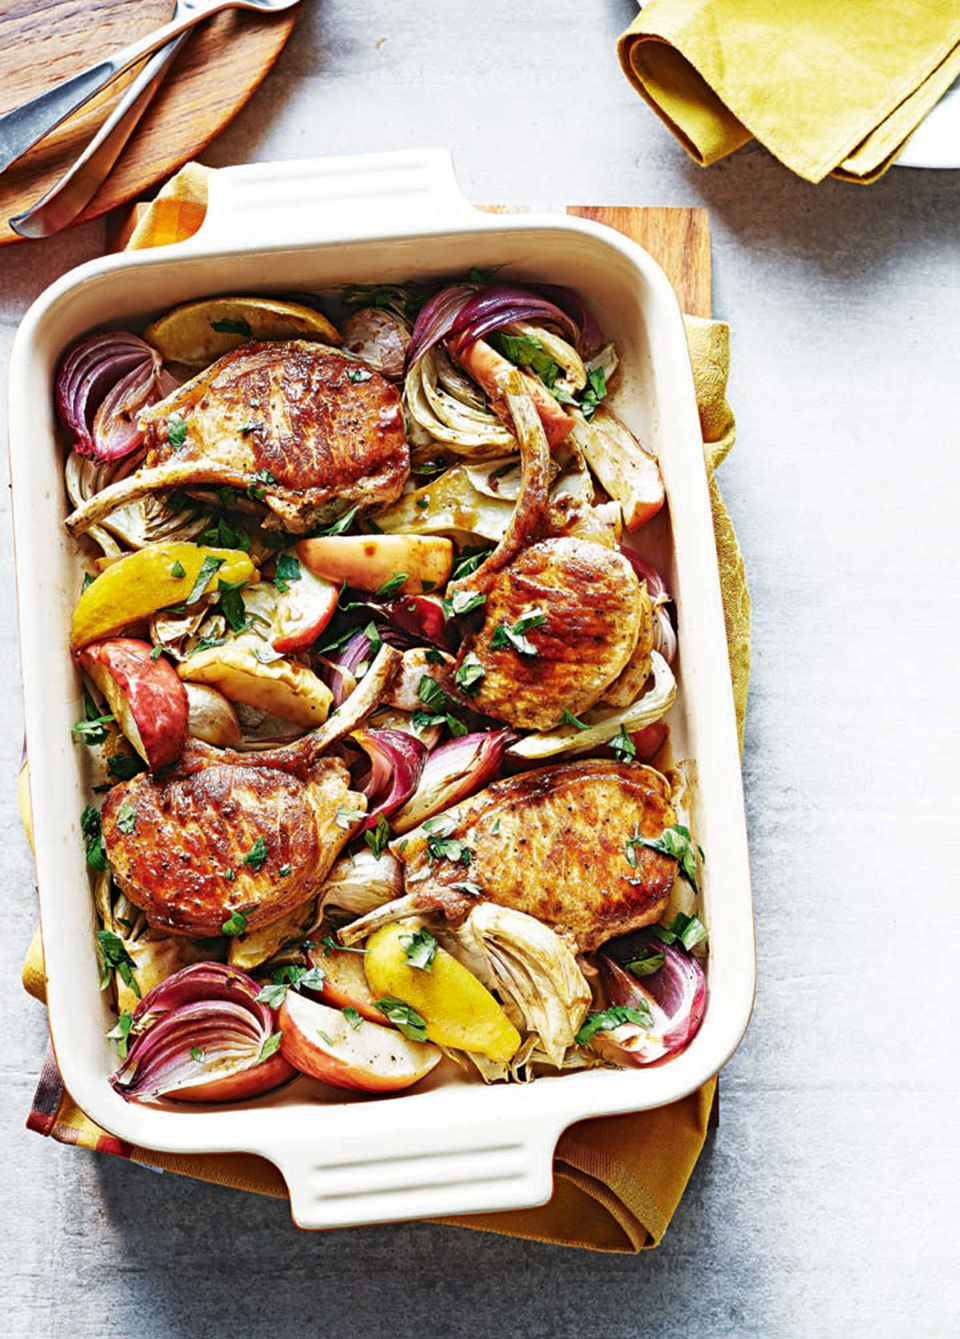 Cider baked pork with apple and fennel ©delicious